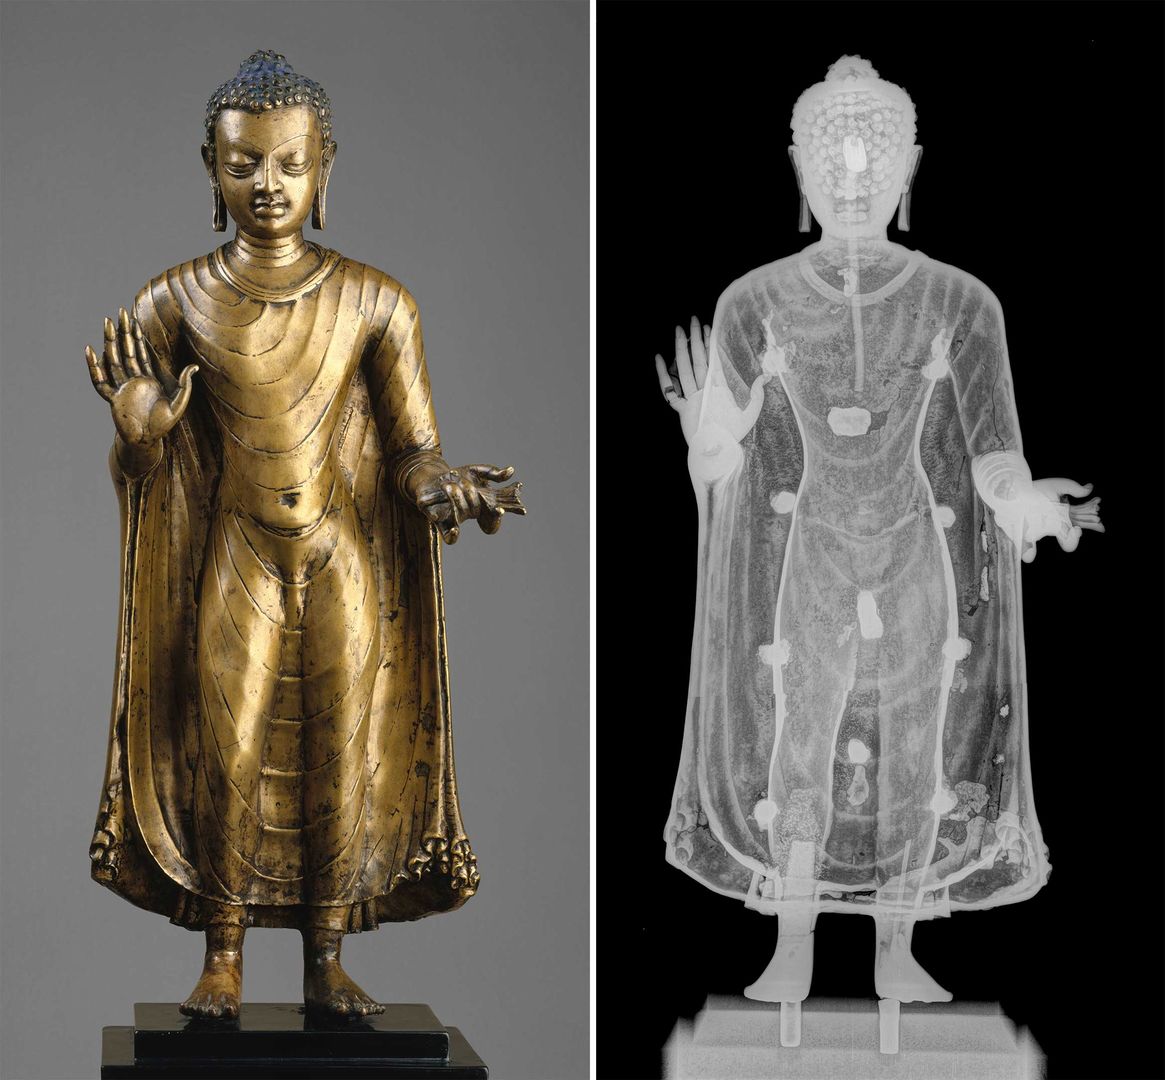 On the left, the bronze statue of Buddha; on the right, an x-ray of the same statue